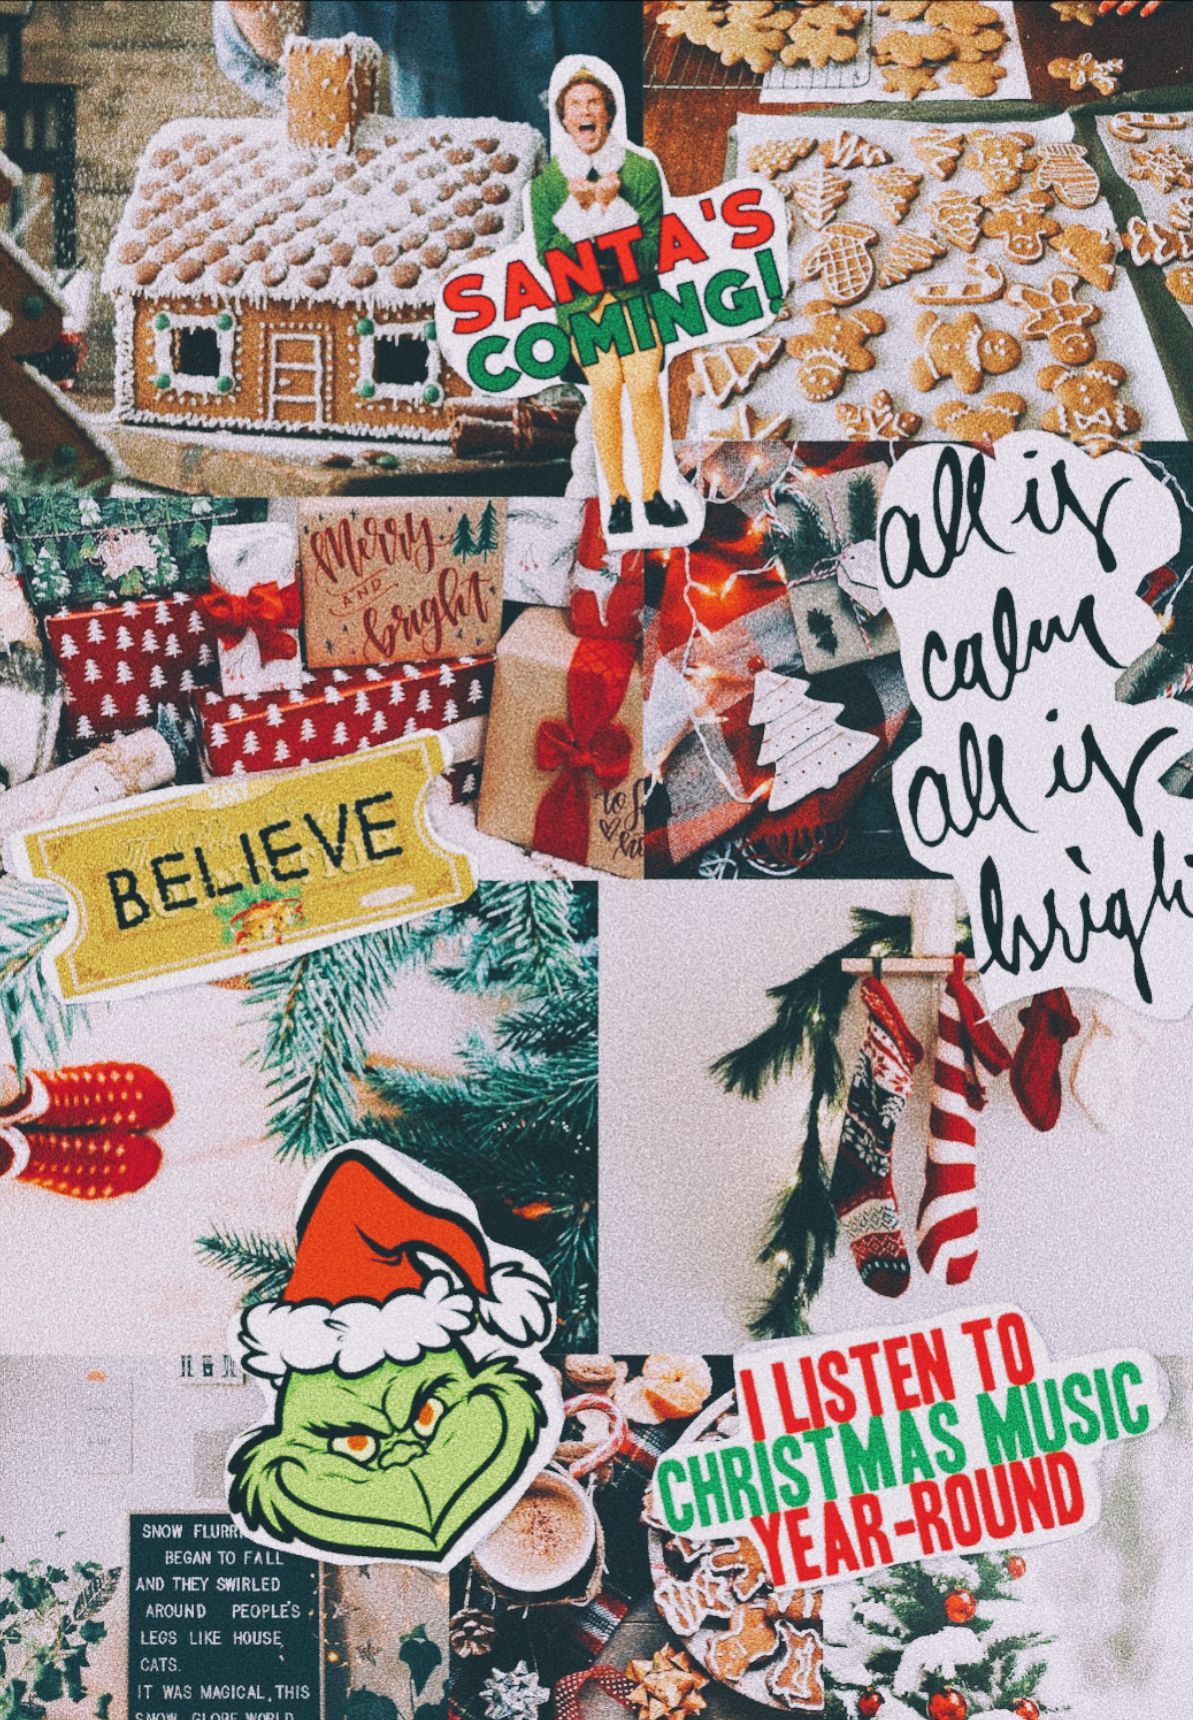 A collage of Christmas themed images including a gingerbread house, socks, and a sign that says 